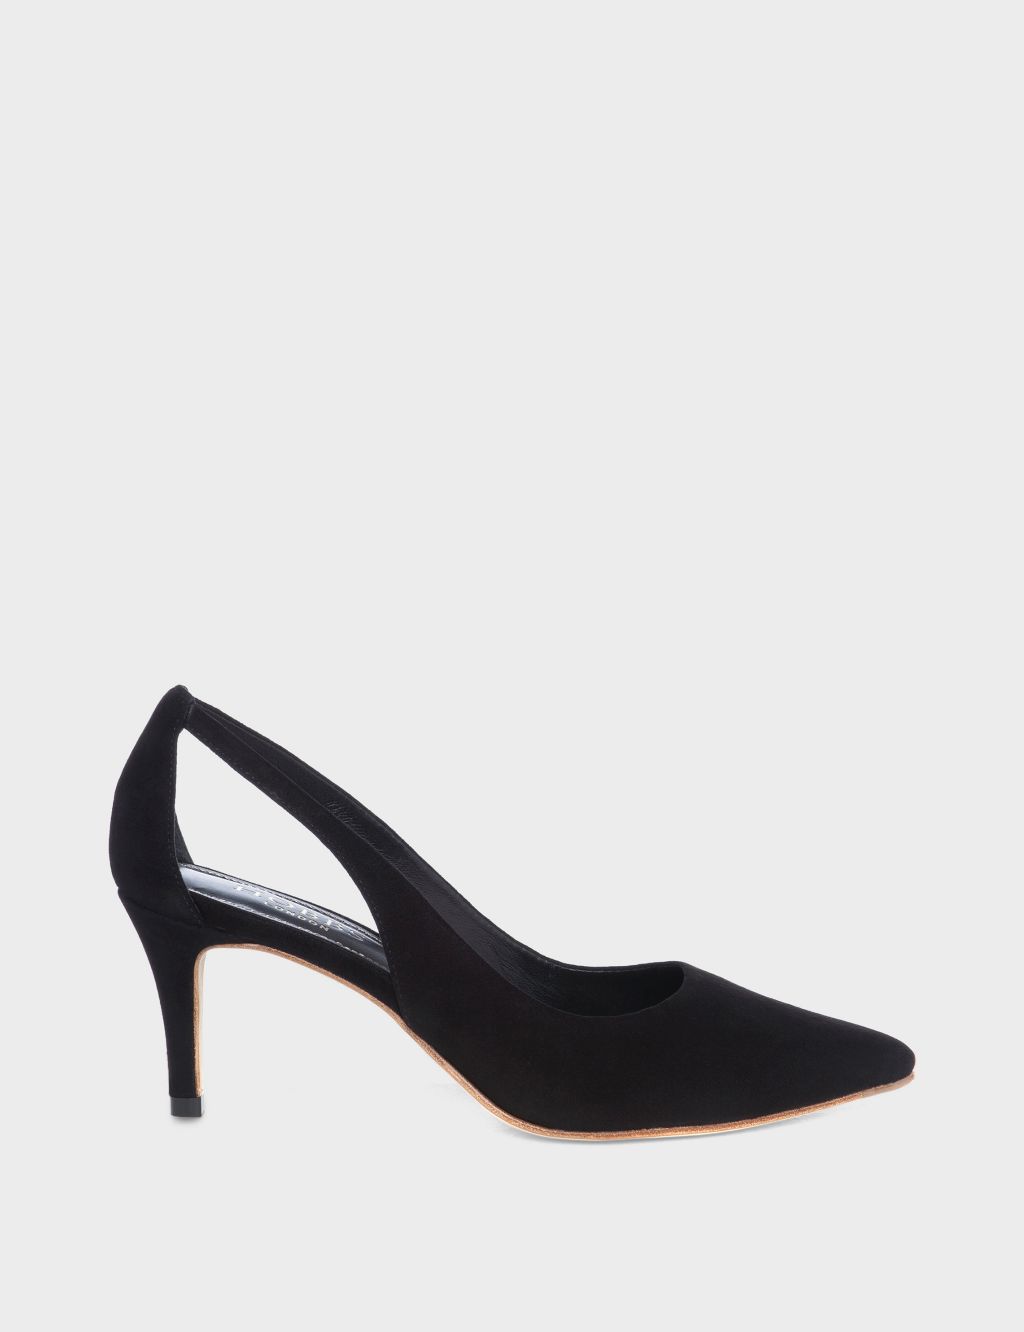 Suede Kitten Heel Pointed Court Shoes image 1